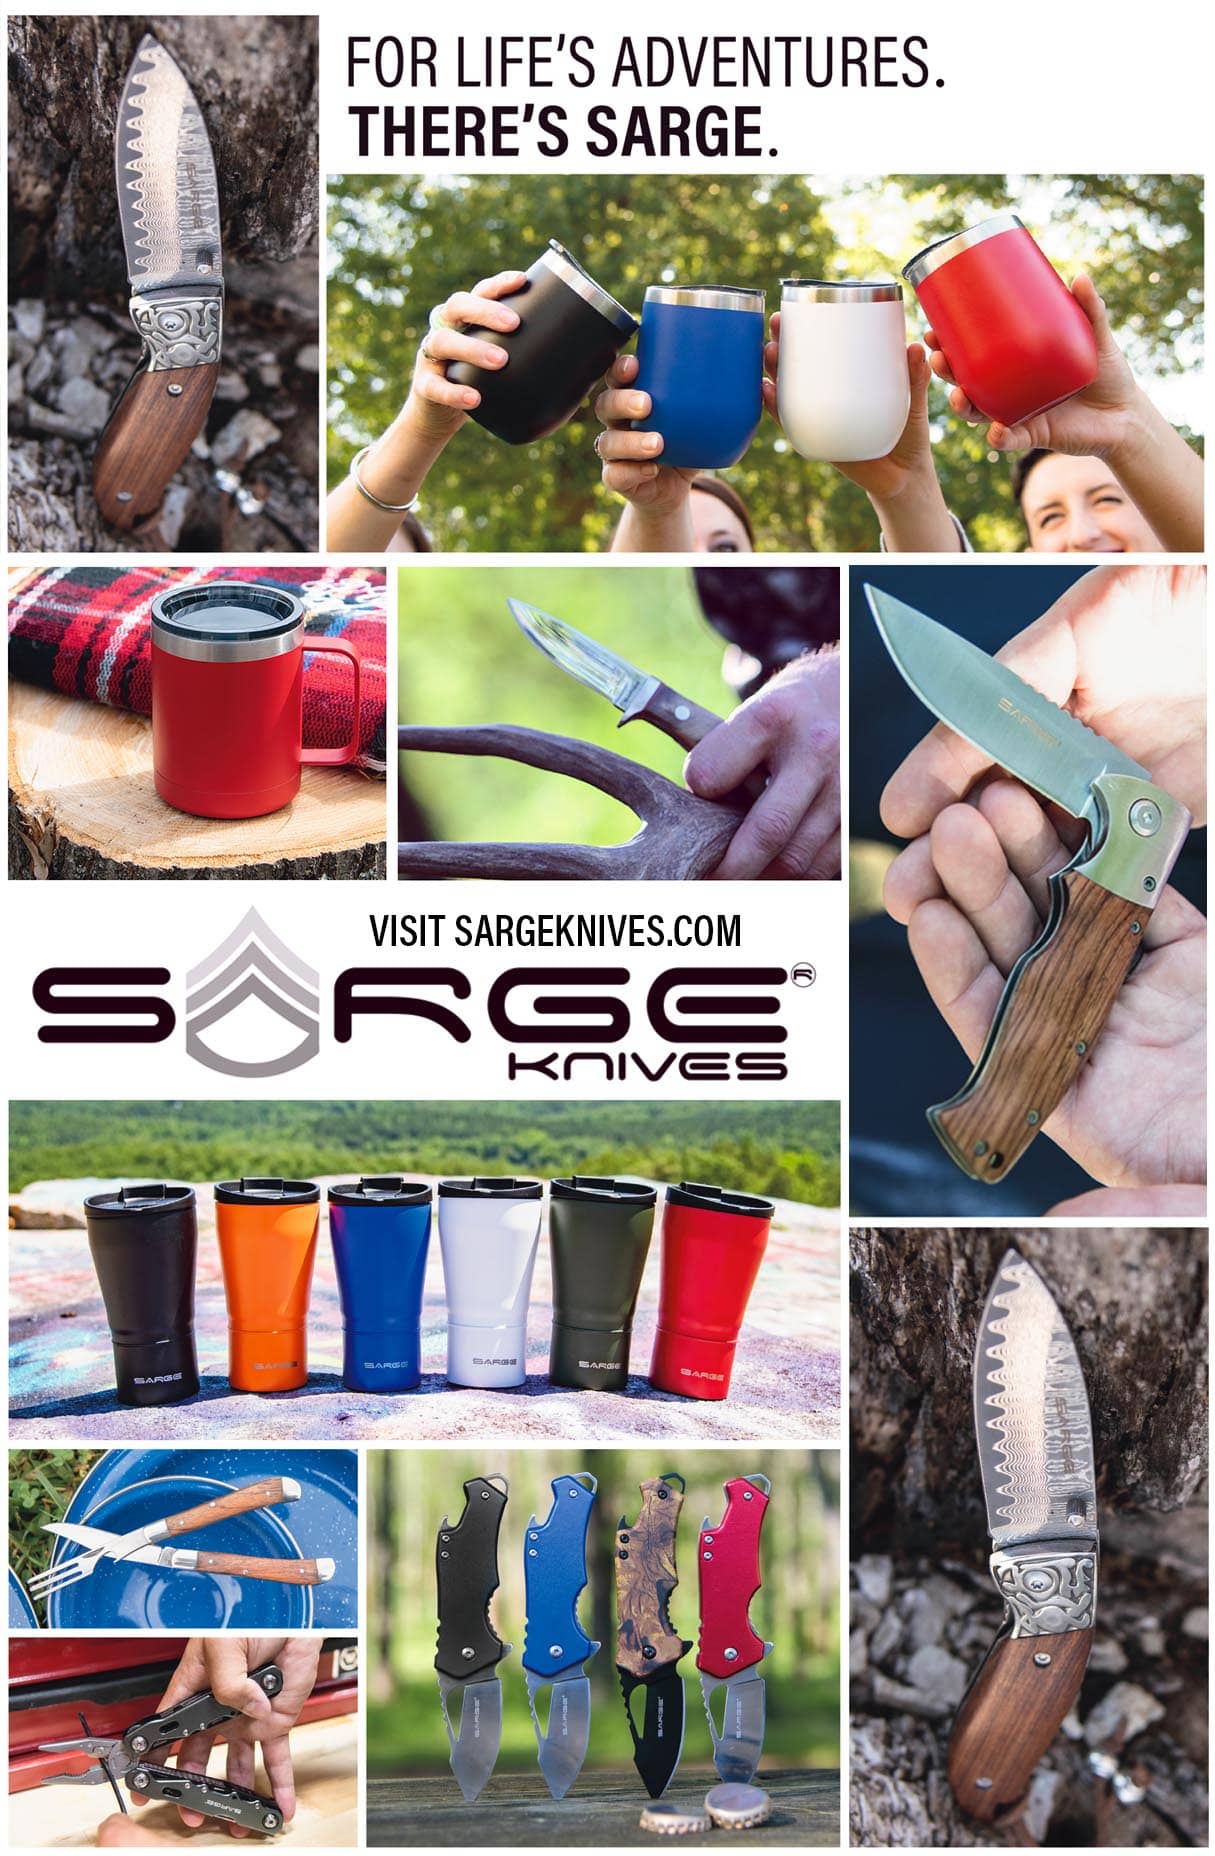 Sarge knives ad for drinkware knives and specialty gifts